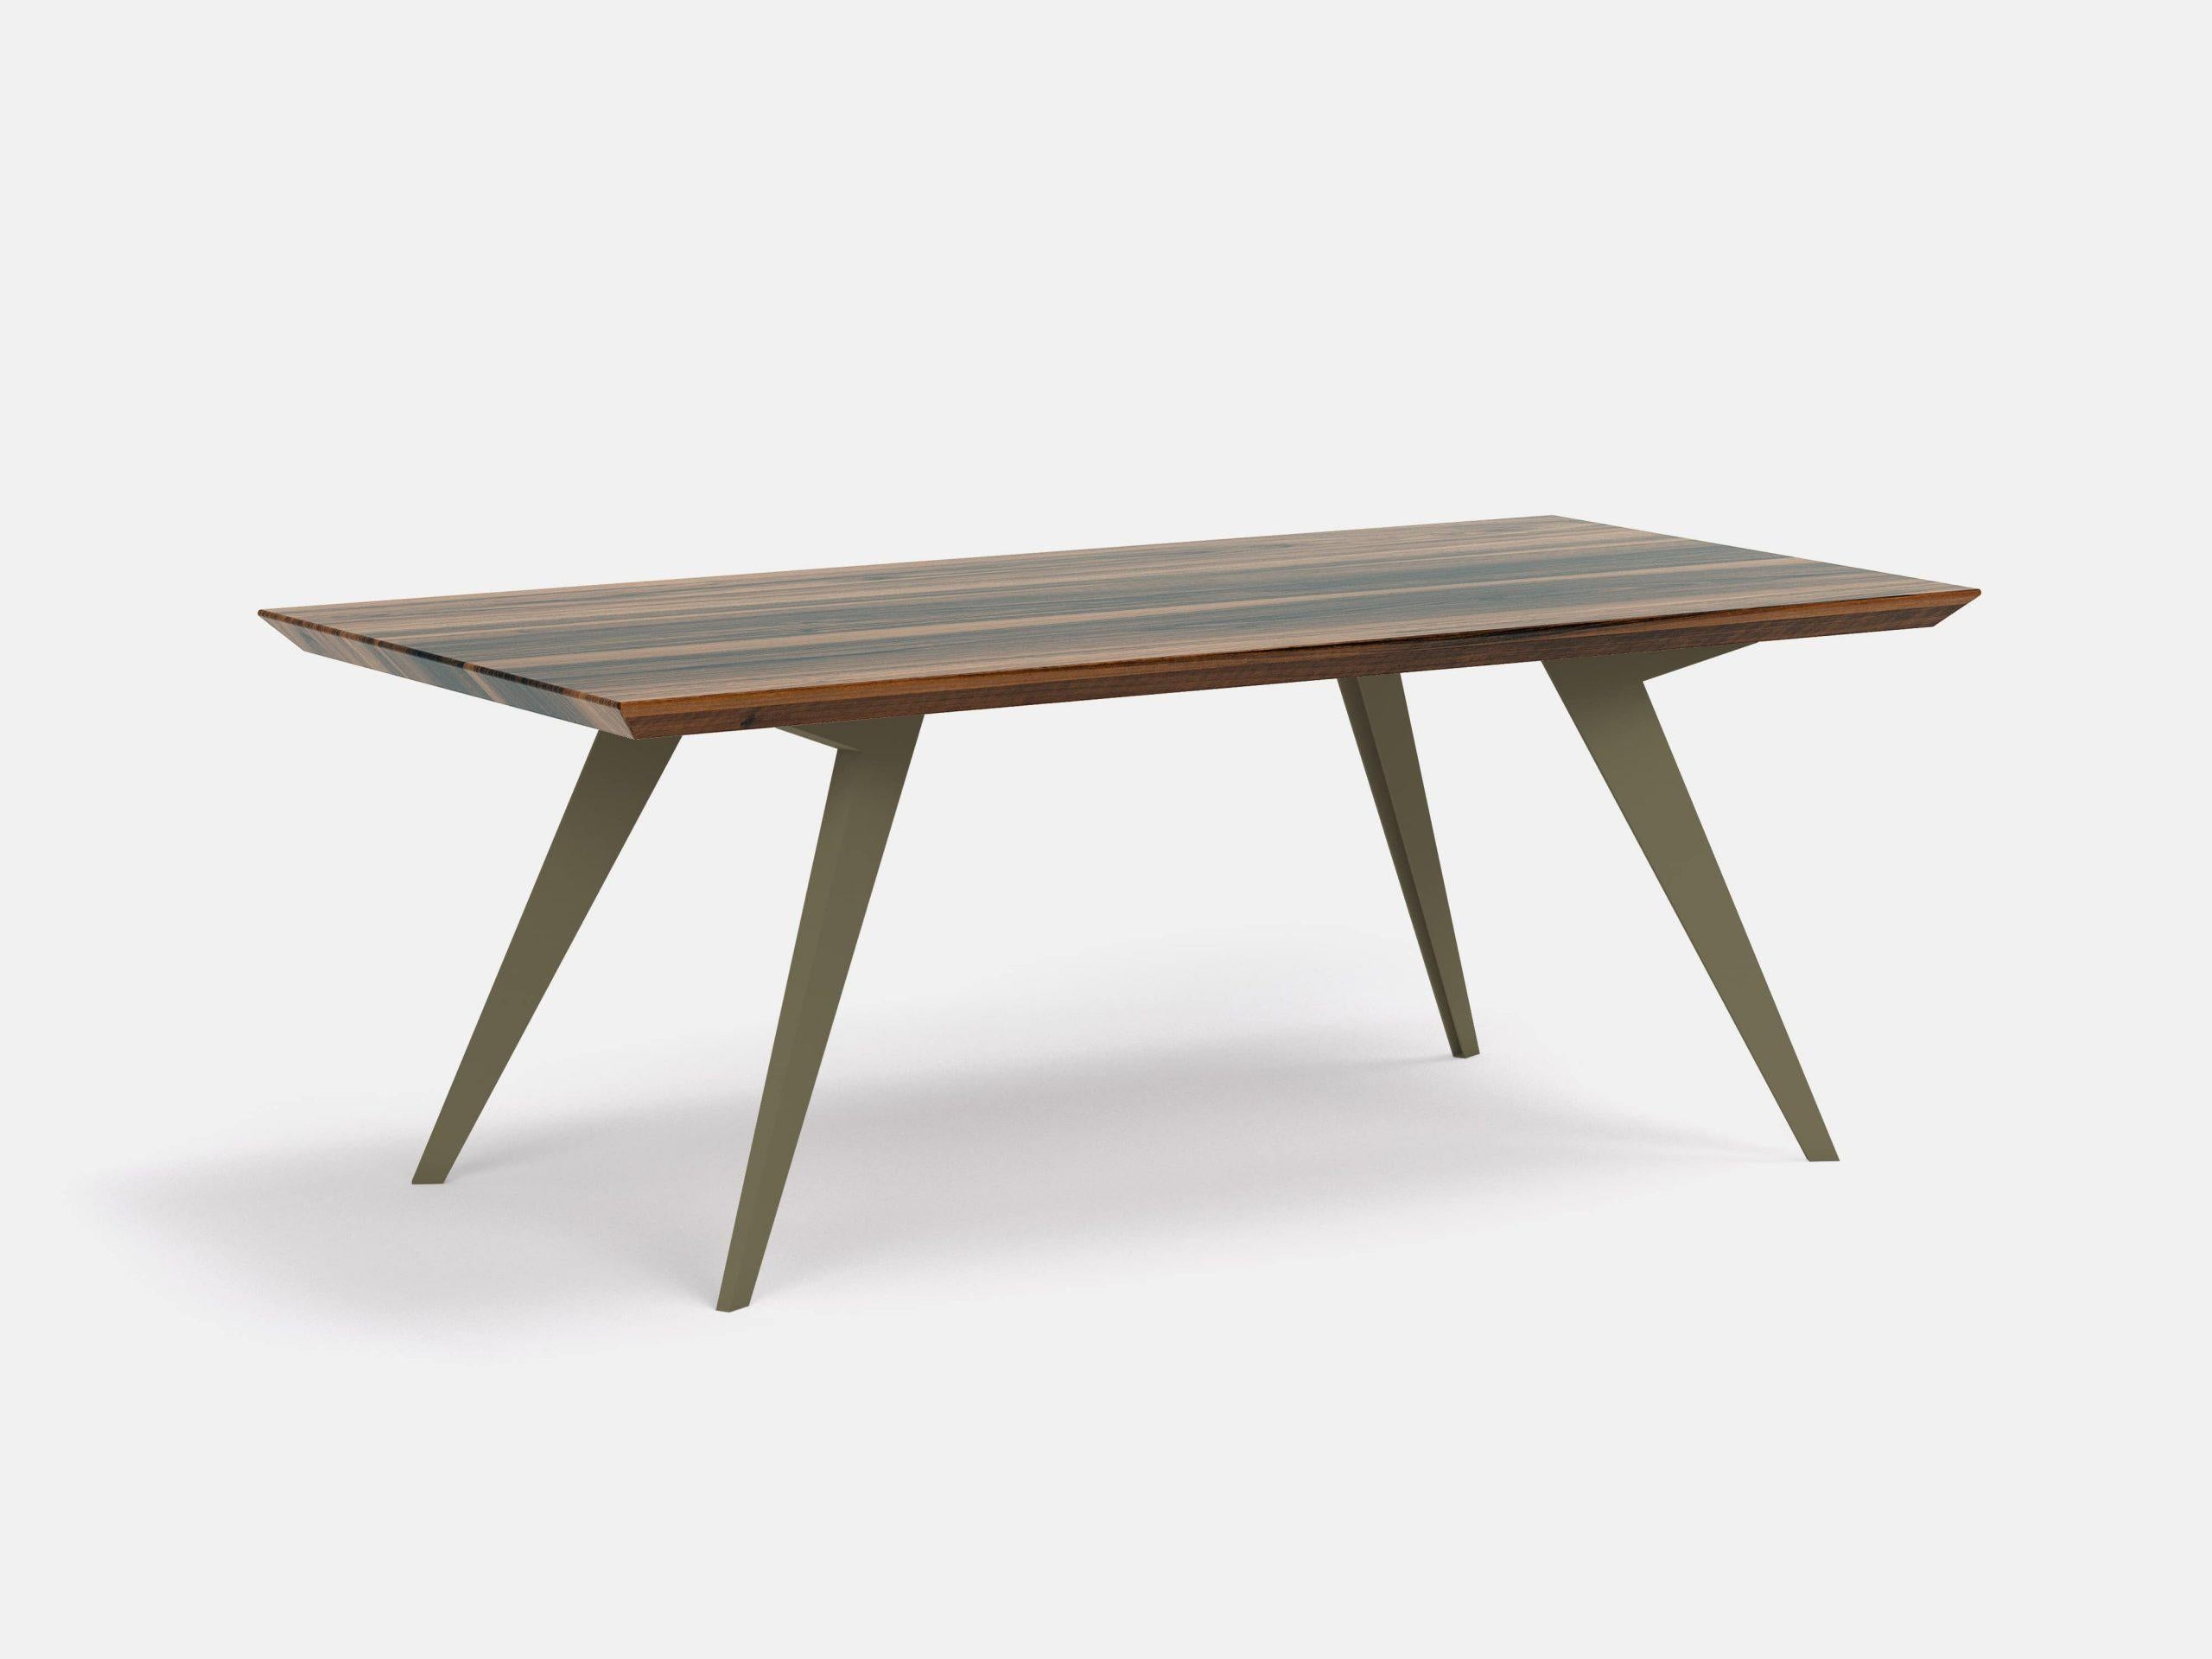 Walnut and steel Minimalist 250 dining table 
Dimensions: W 250 x D 100 x H 75 cm
Materials: American walnut 100% solid wood, steel legs

Dimensions available: 160, 200, 250, 300, 350, 400 cm.
 

Roly-Poly table is the proof that through